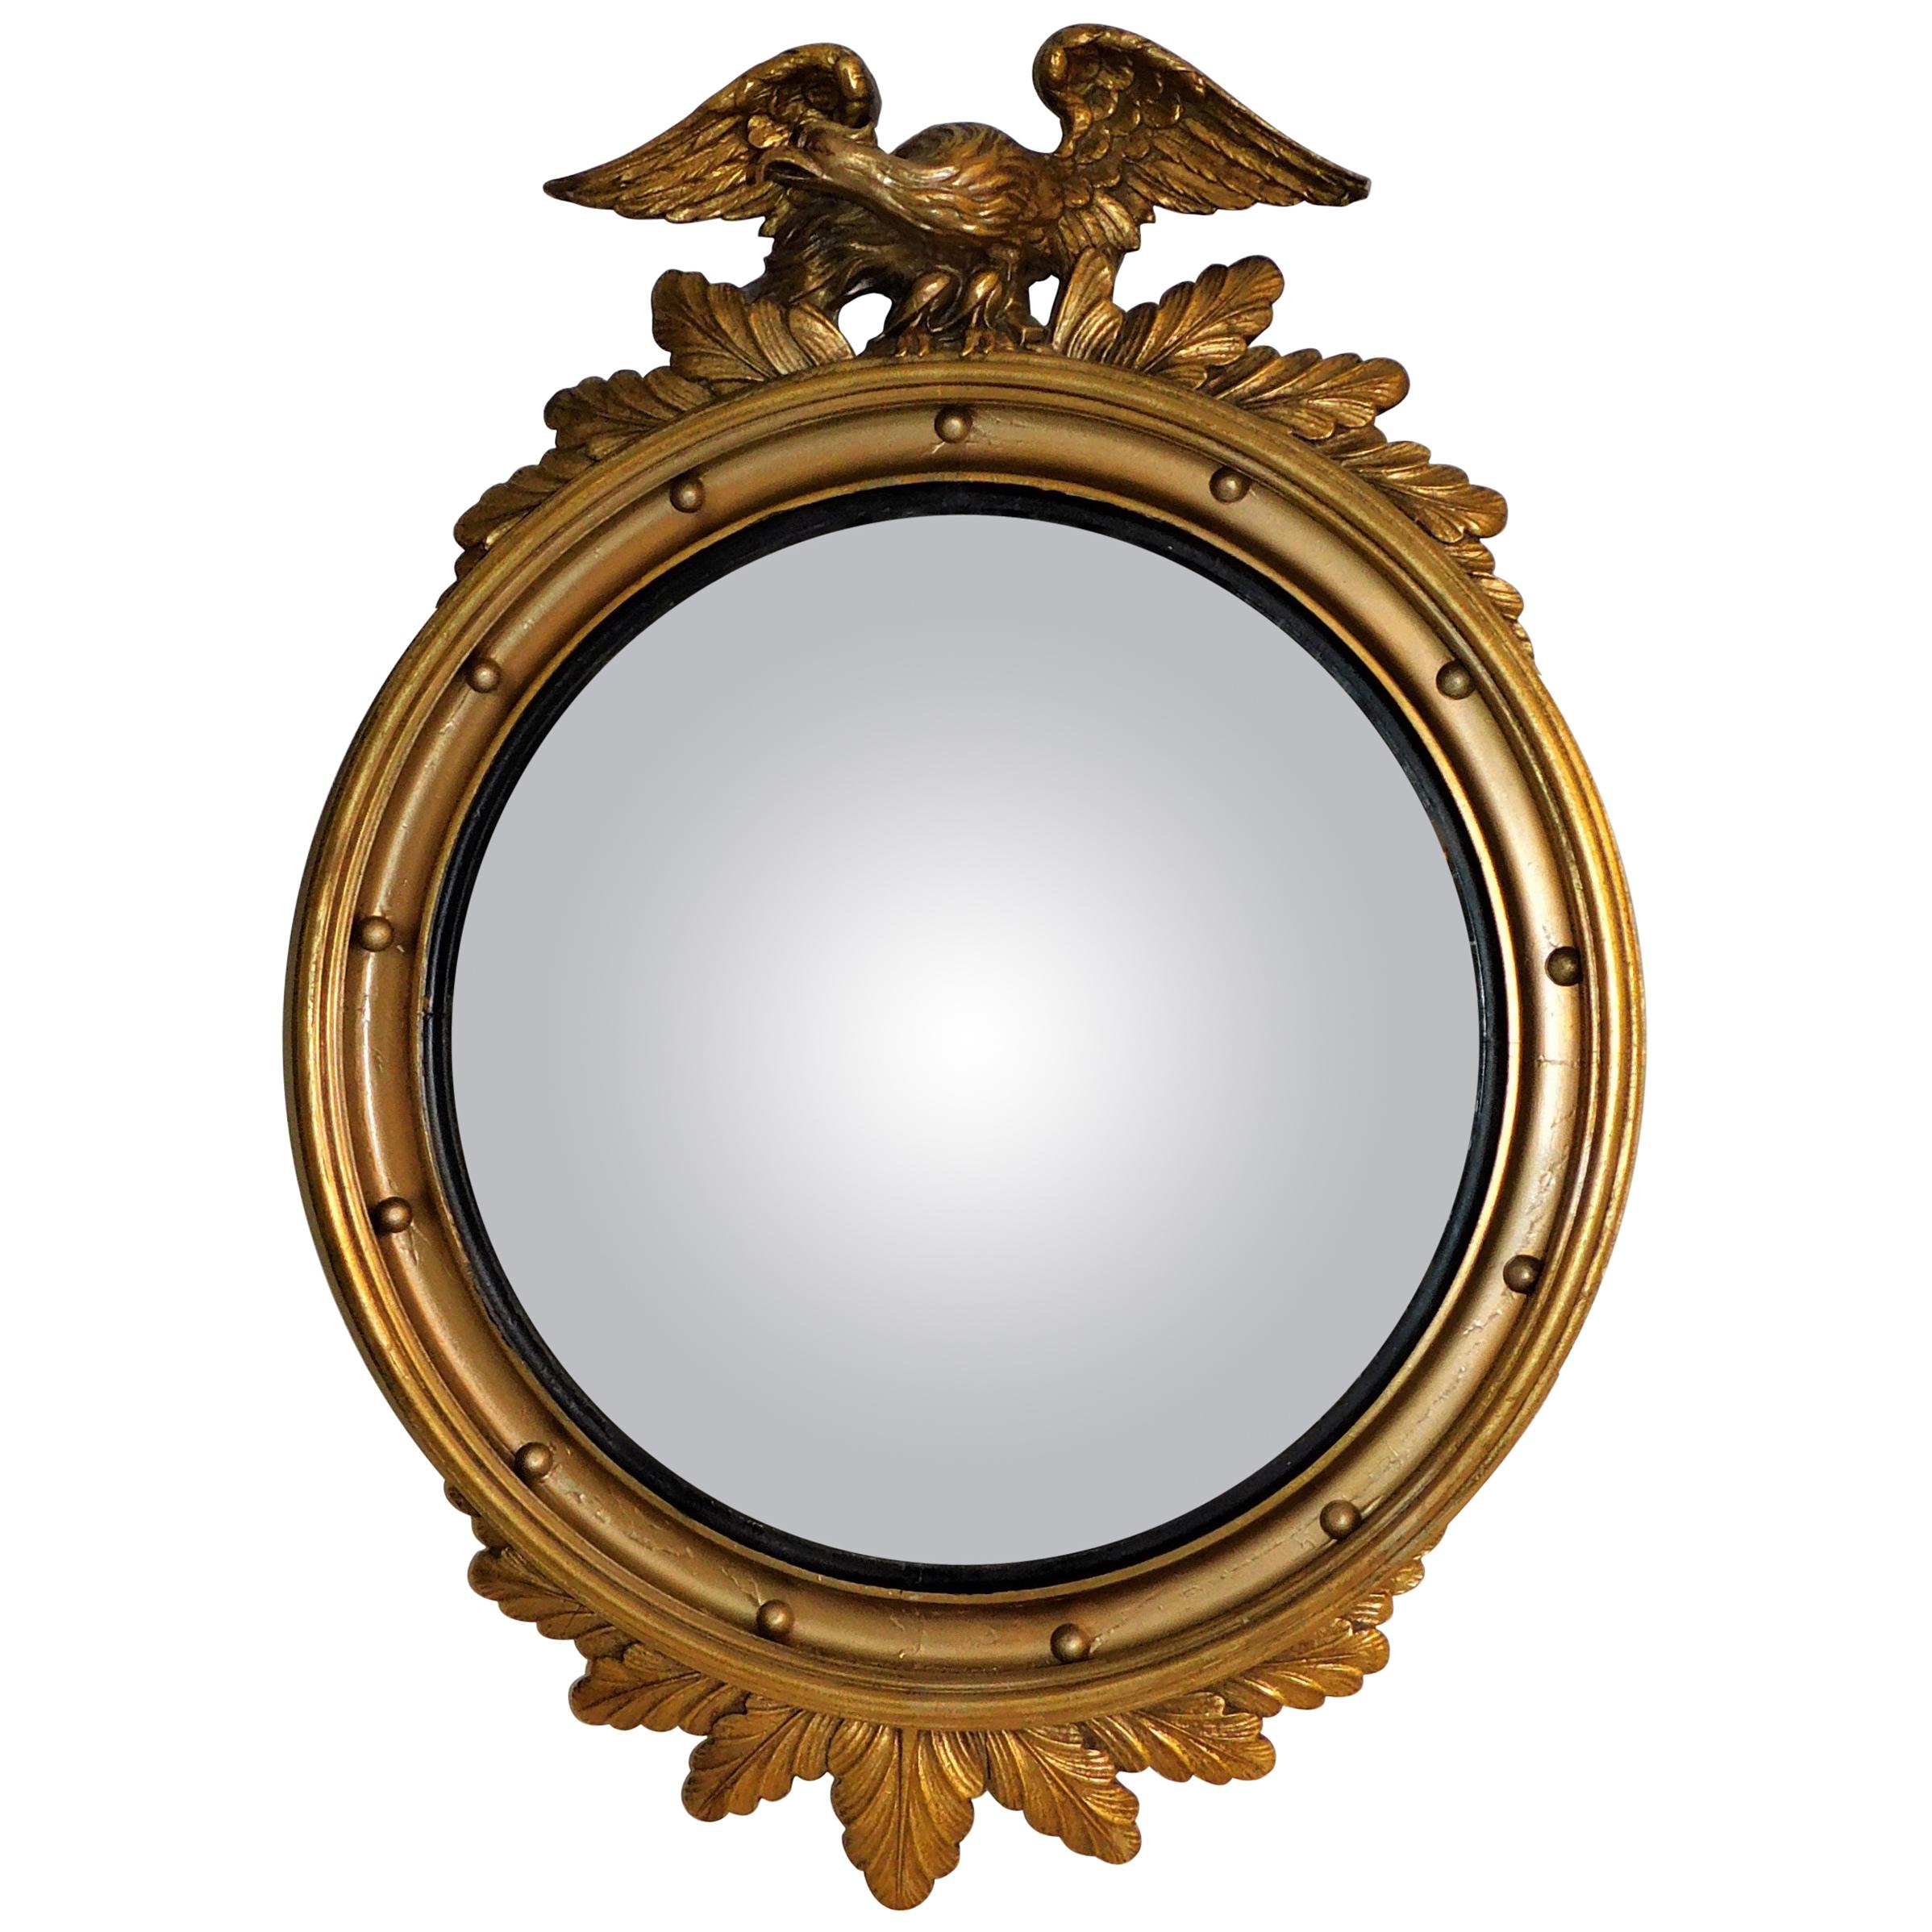 Large American Gilt Carved Wood Eagle Oval Convex Wall Mirror, circa 1890